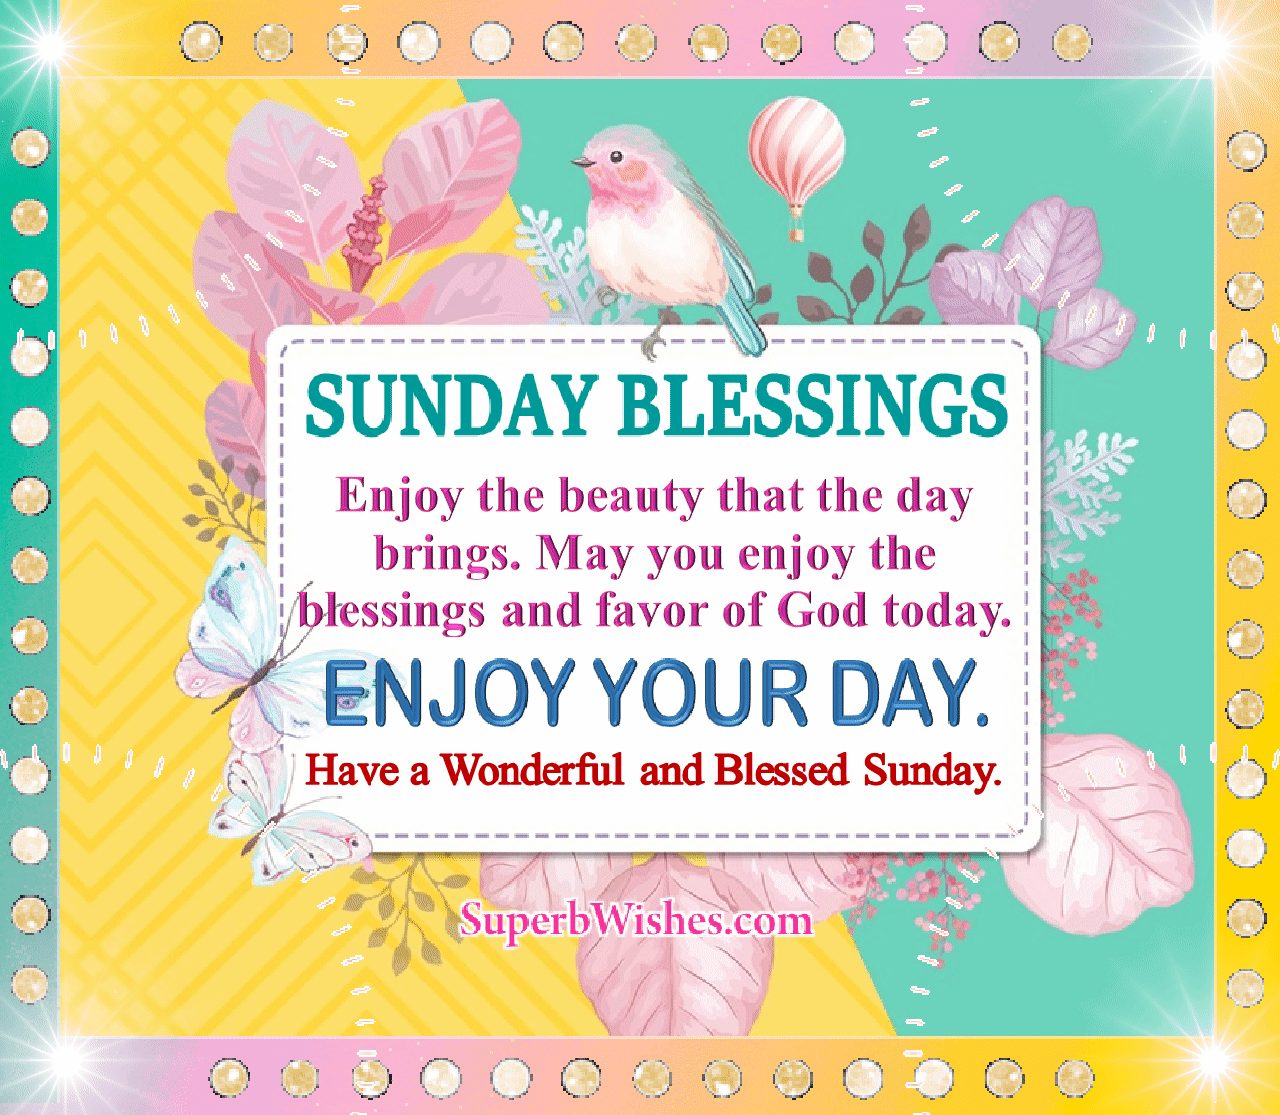 Have a blessed Sunday GIFs and quotes. Superbwishes.com